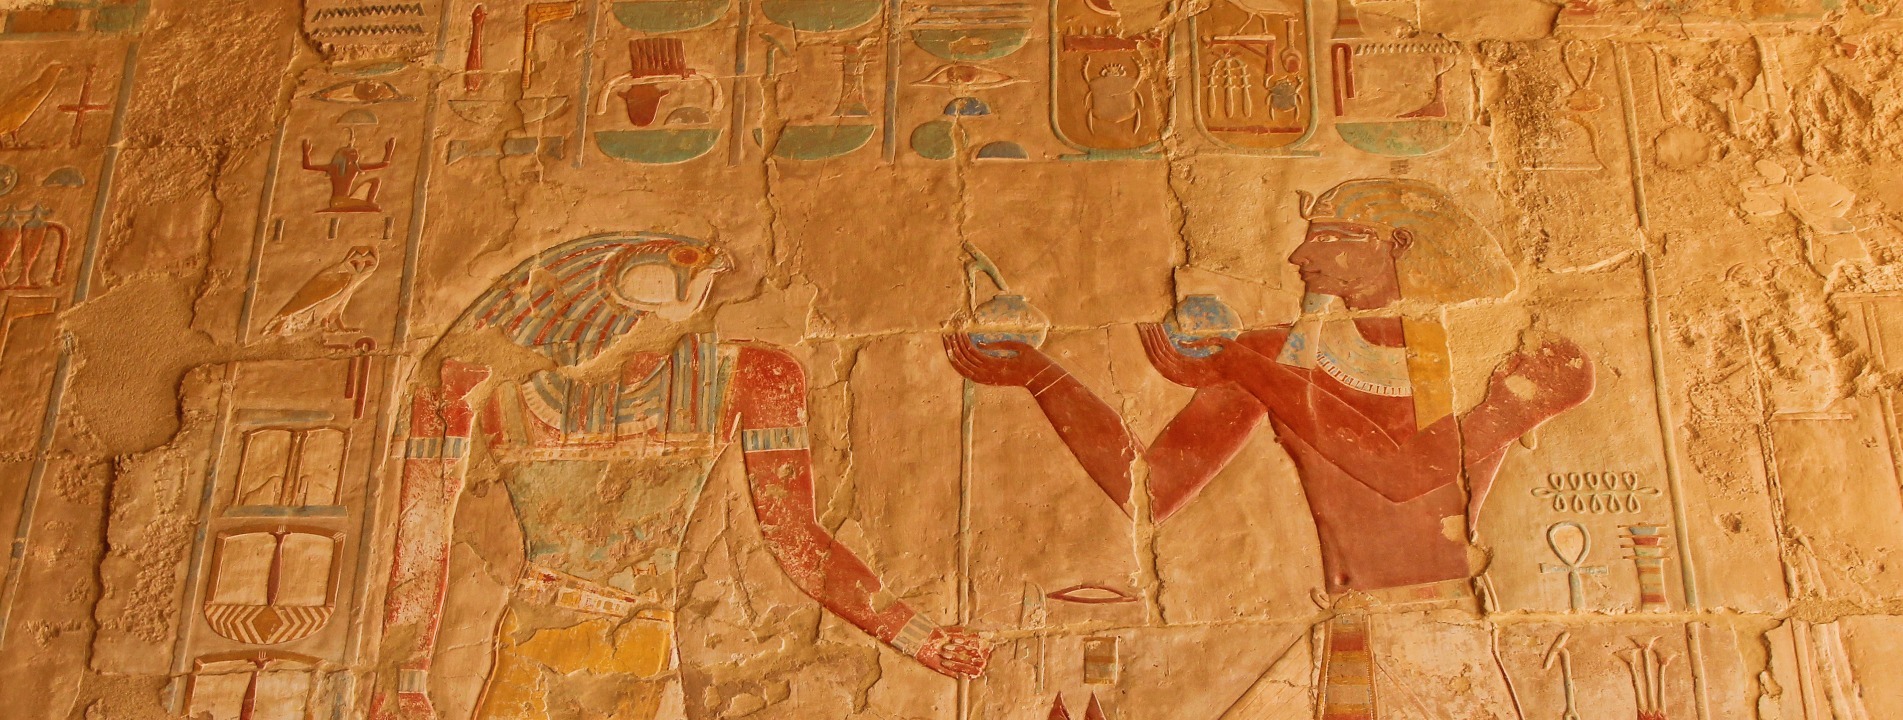 The Top 10 Egyptian Souvenirs to Take Home